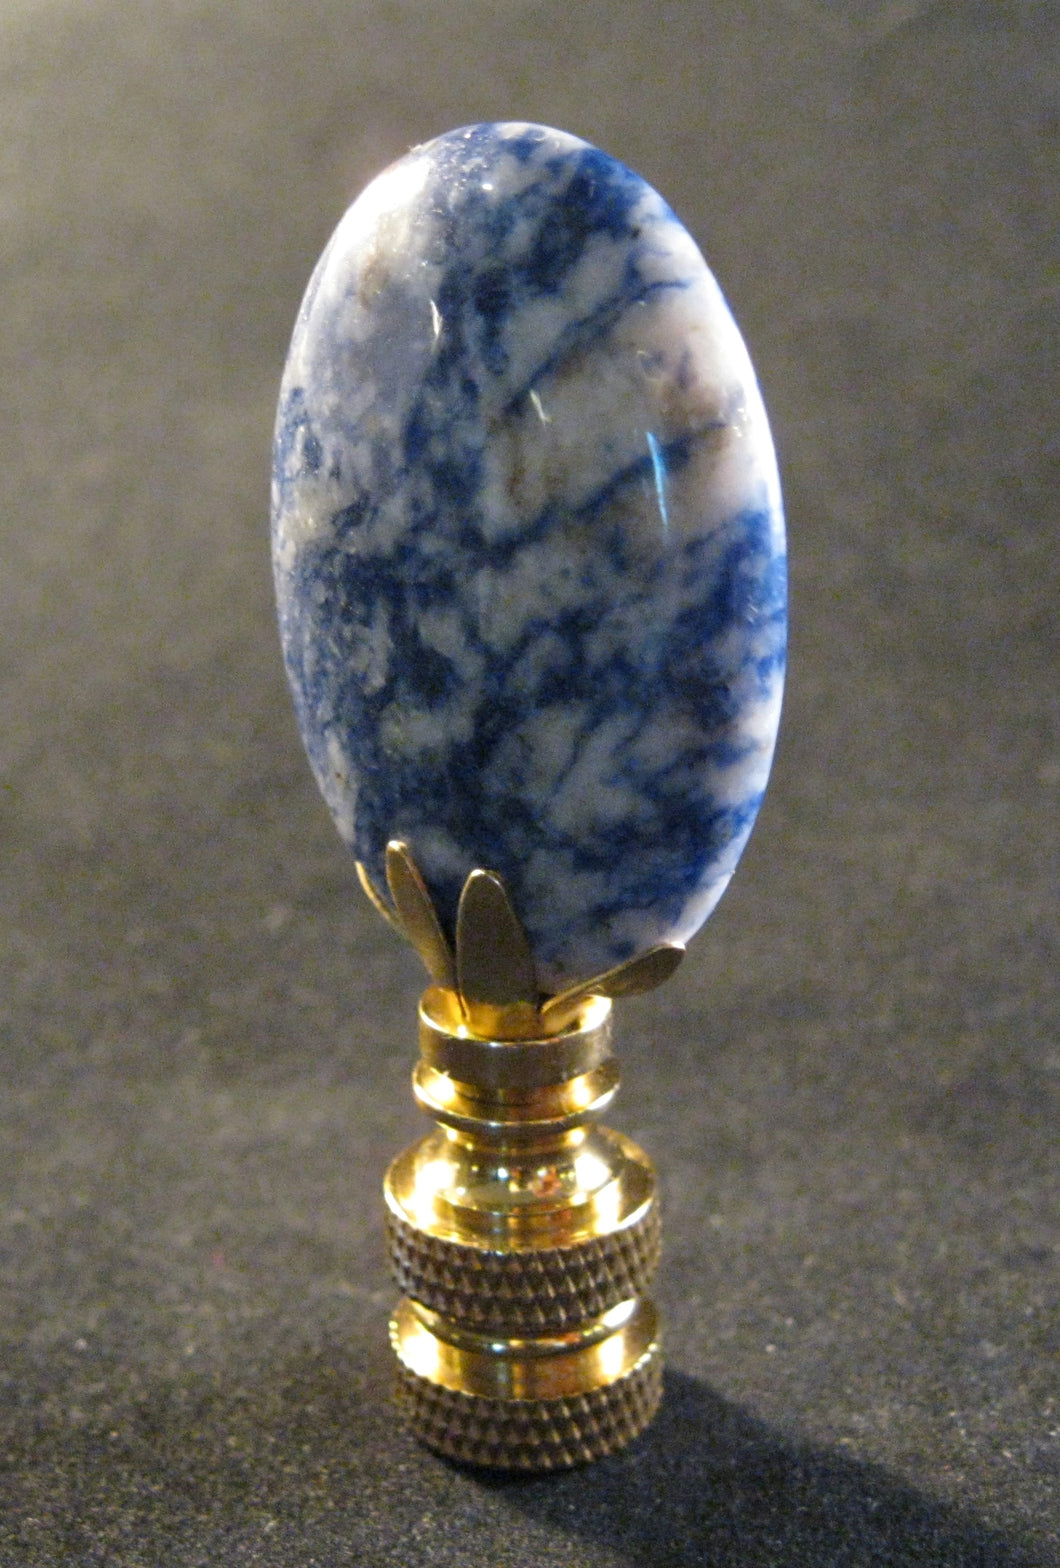 BLUE SPOT Agate Lamp Finial with PB,SN or AB Base (1-PC.)